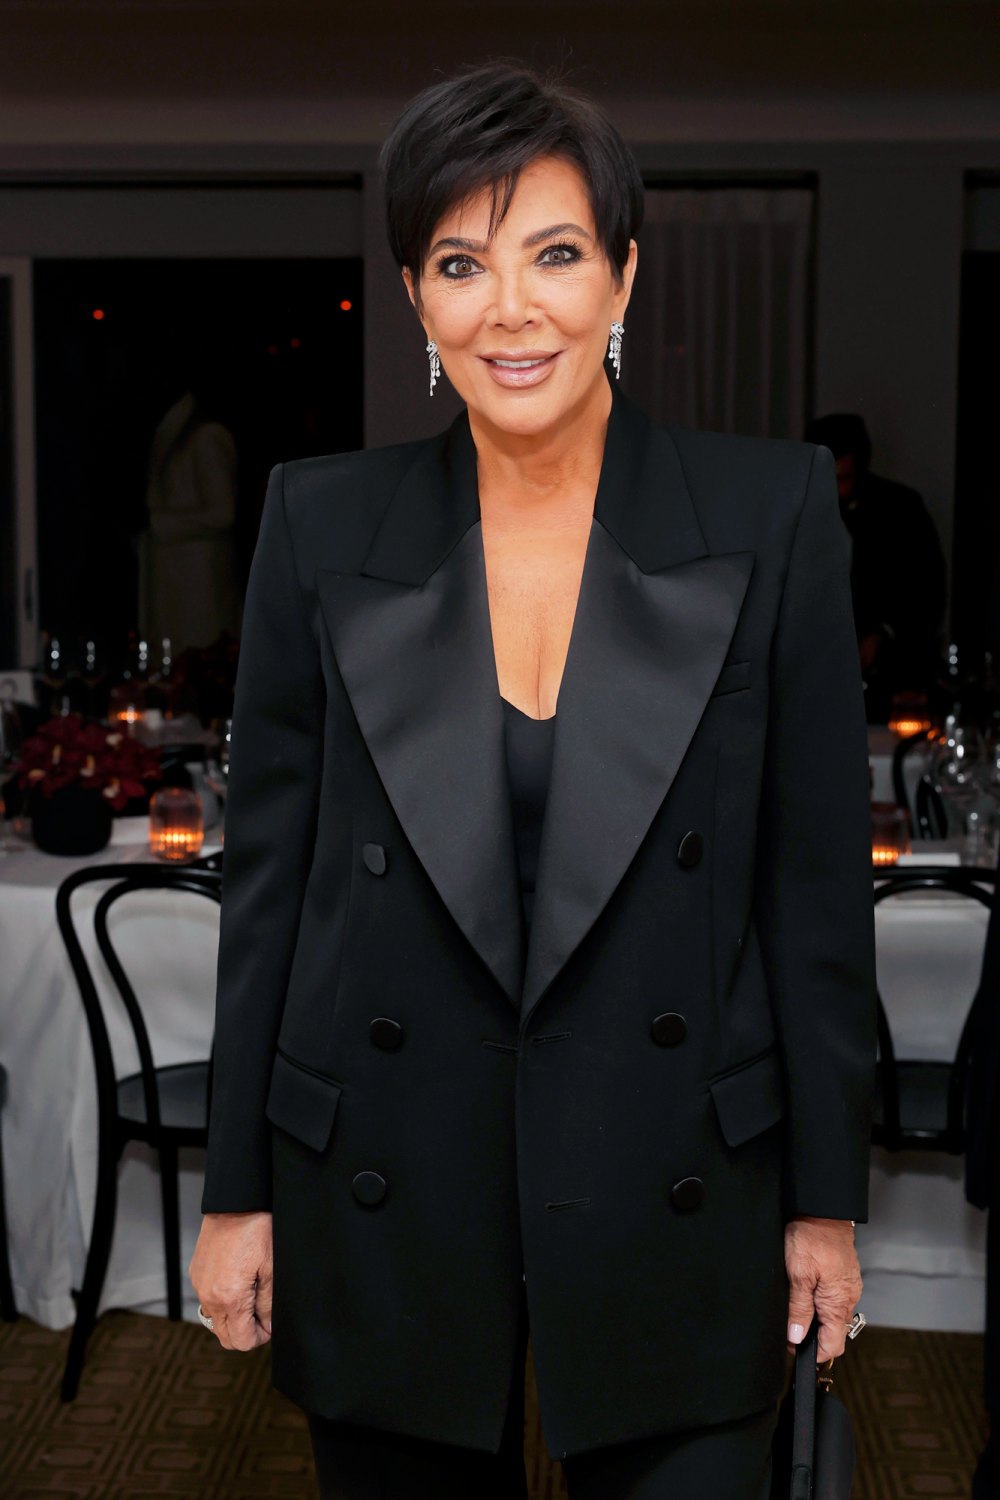 How Does Kris Jenner Nickname Her Kids in Her Phone